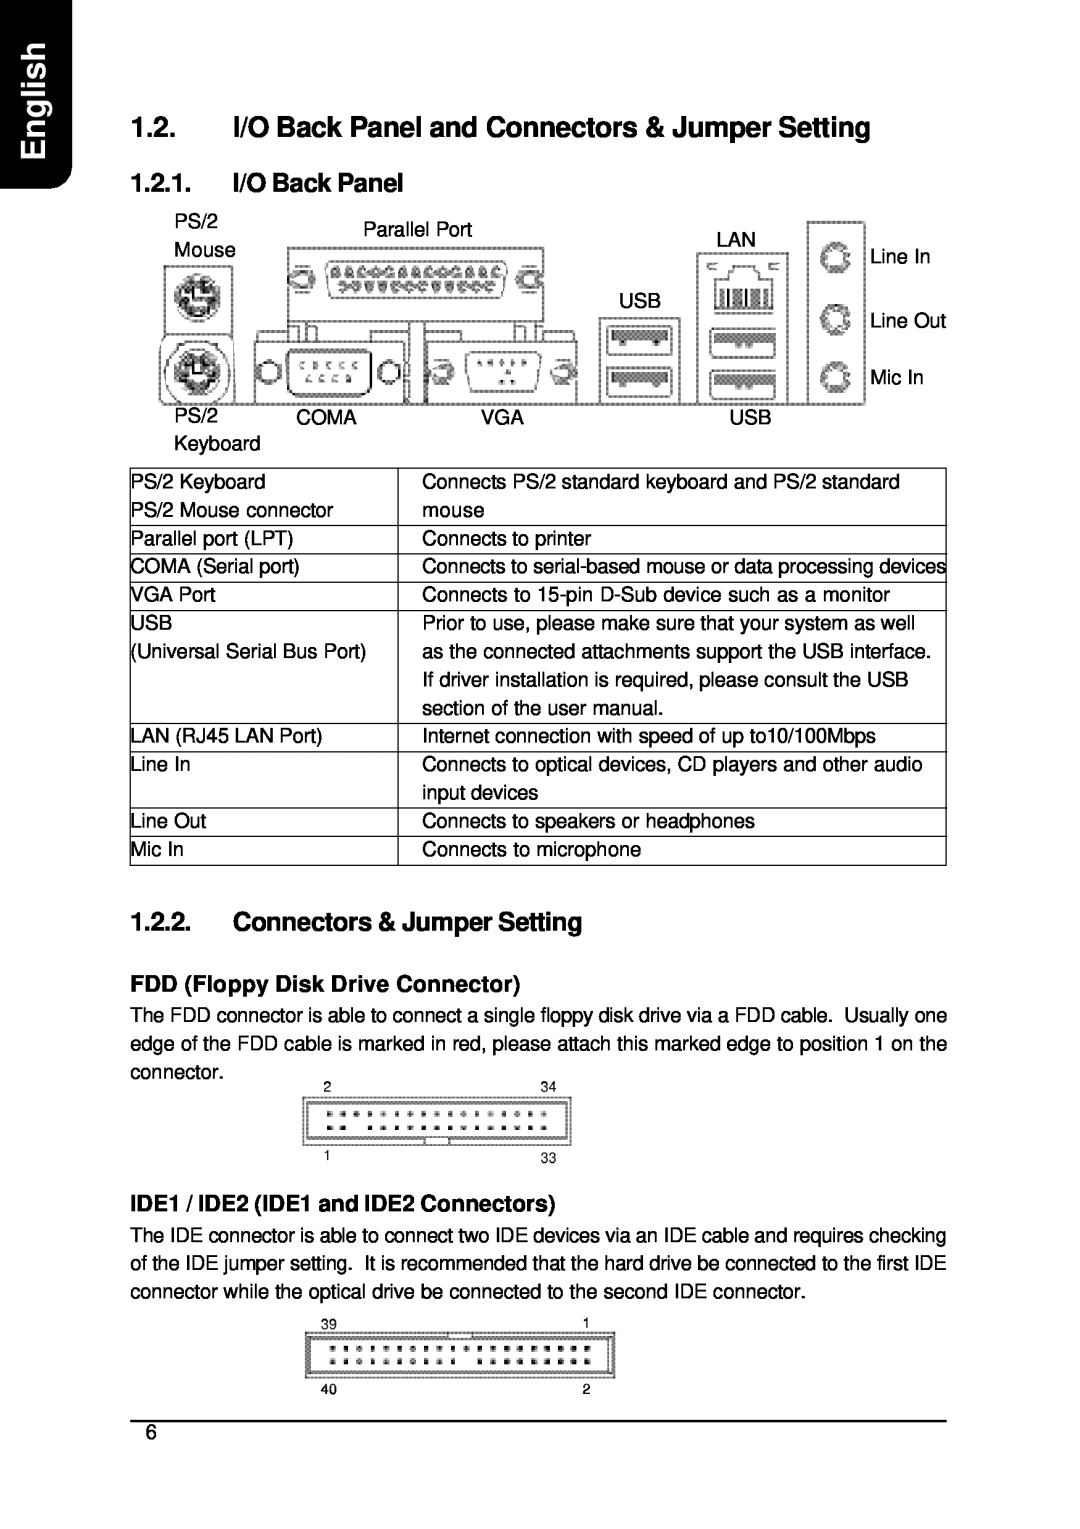 Intel XP-M5S661GX user manual 1.2.1.I/O Back Panel, Connectors & Jumper Setting, FDD Floppy Disk Drive Connector, English 